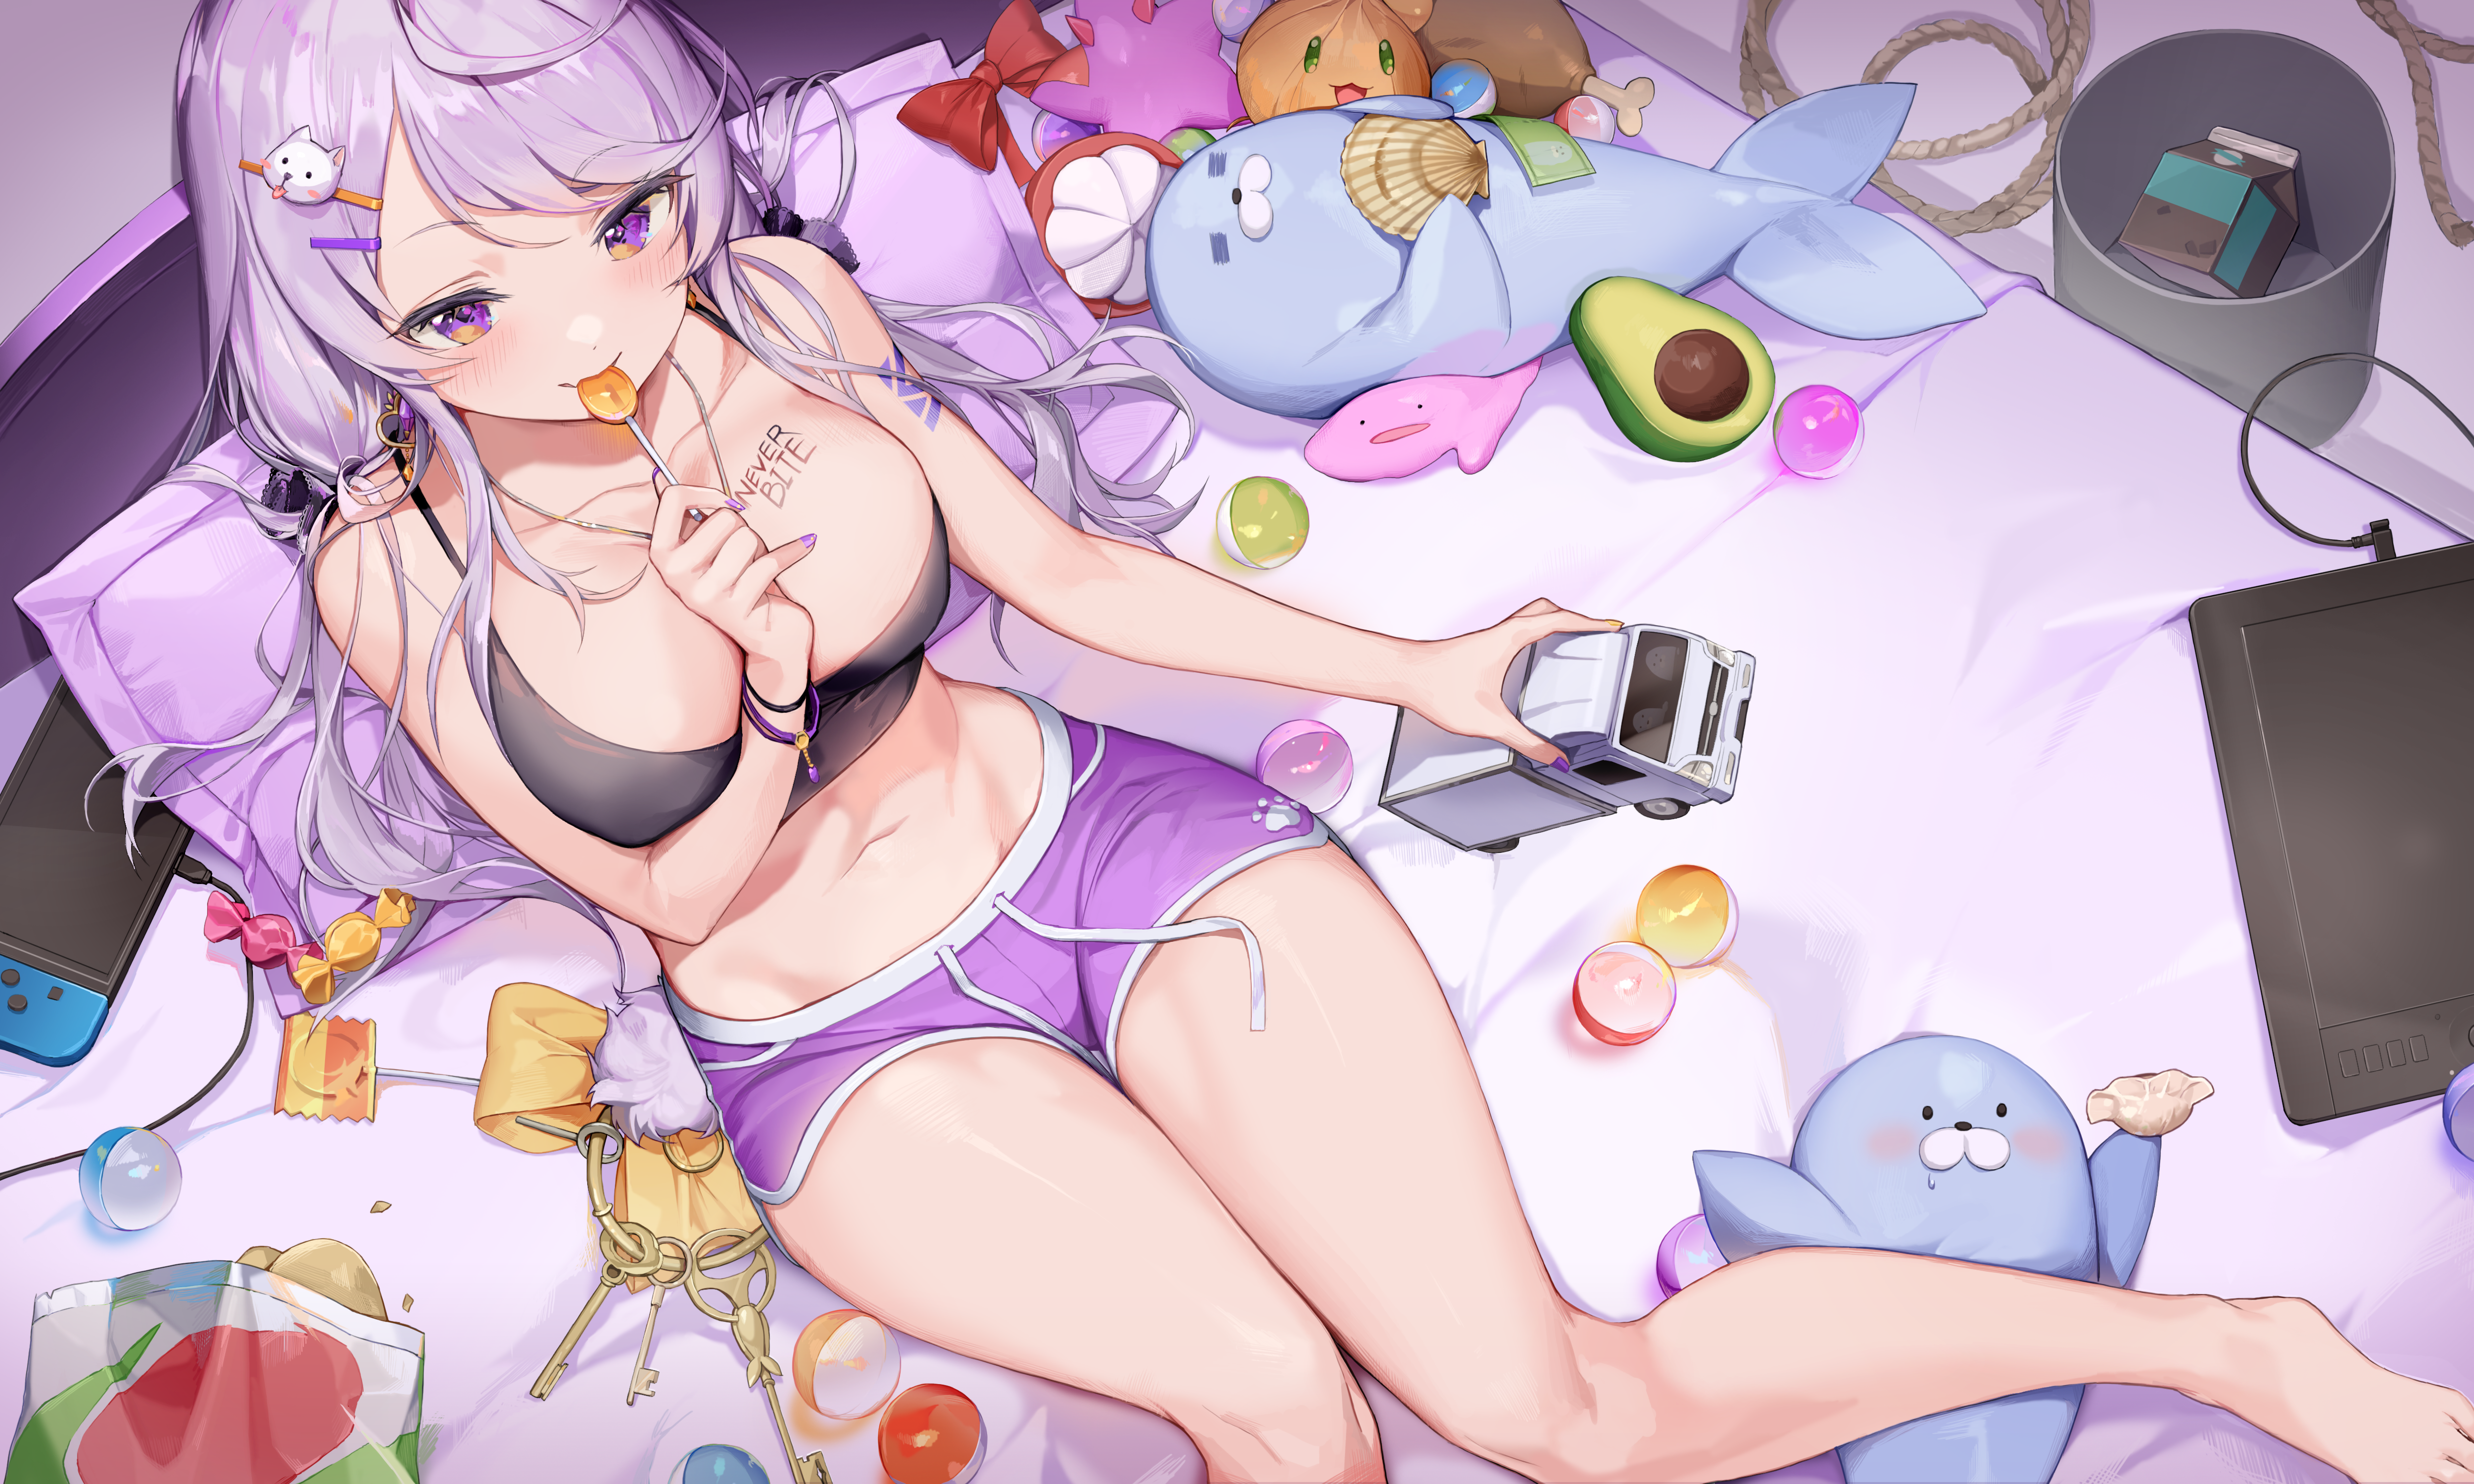 Anime 5000x3000 anime anime girls cleavage dolphin shorts original characters Chyo Nintendo Switch consoles indoors women indoors avocados looking at viewer hair ornament camisole collarbone big boobs purple hair purple eyes in bed bed lollipop lying down stuffed animal toys multi-colored eyes keys condom pillow long hair legs belly bedroom messy bright